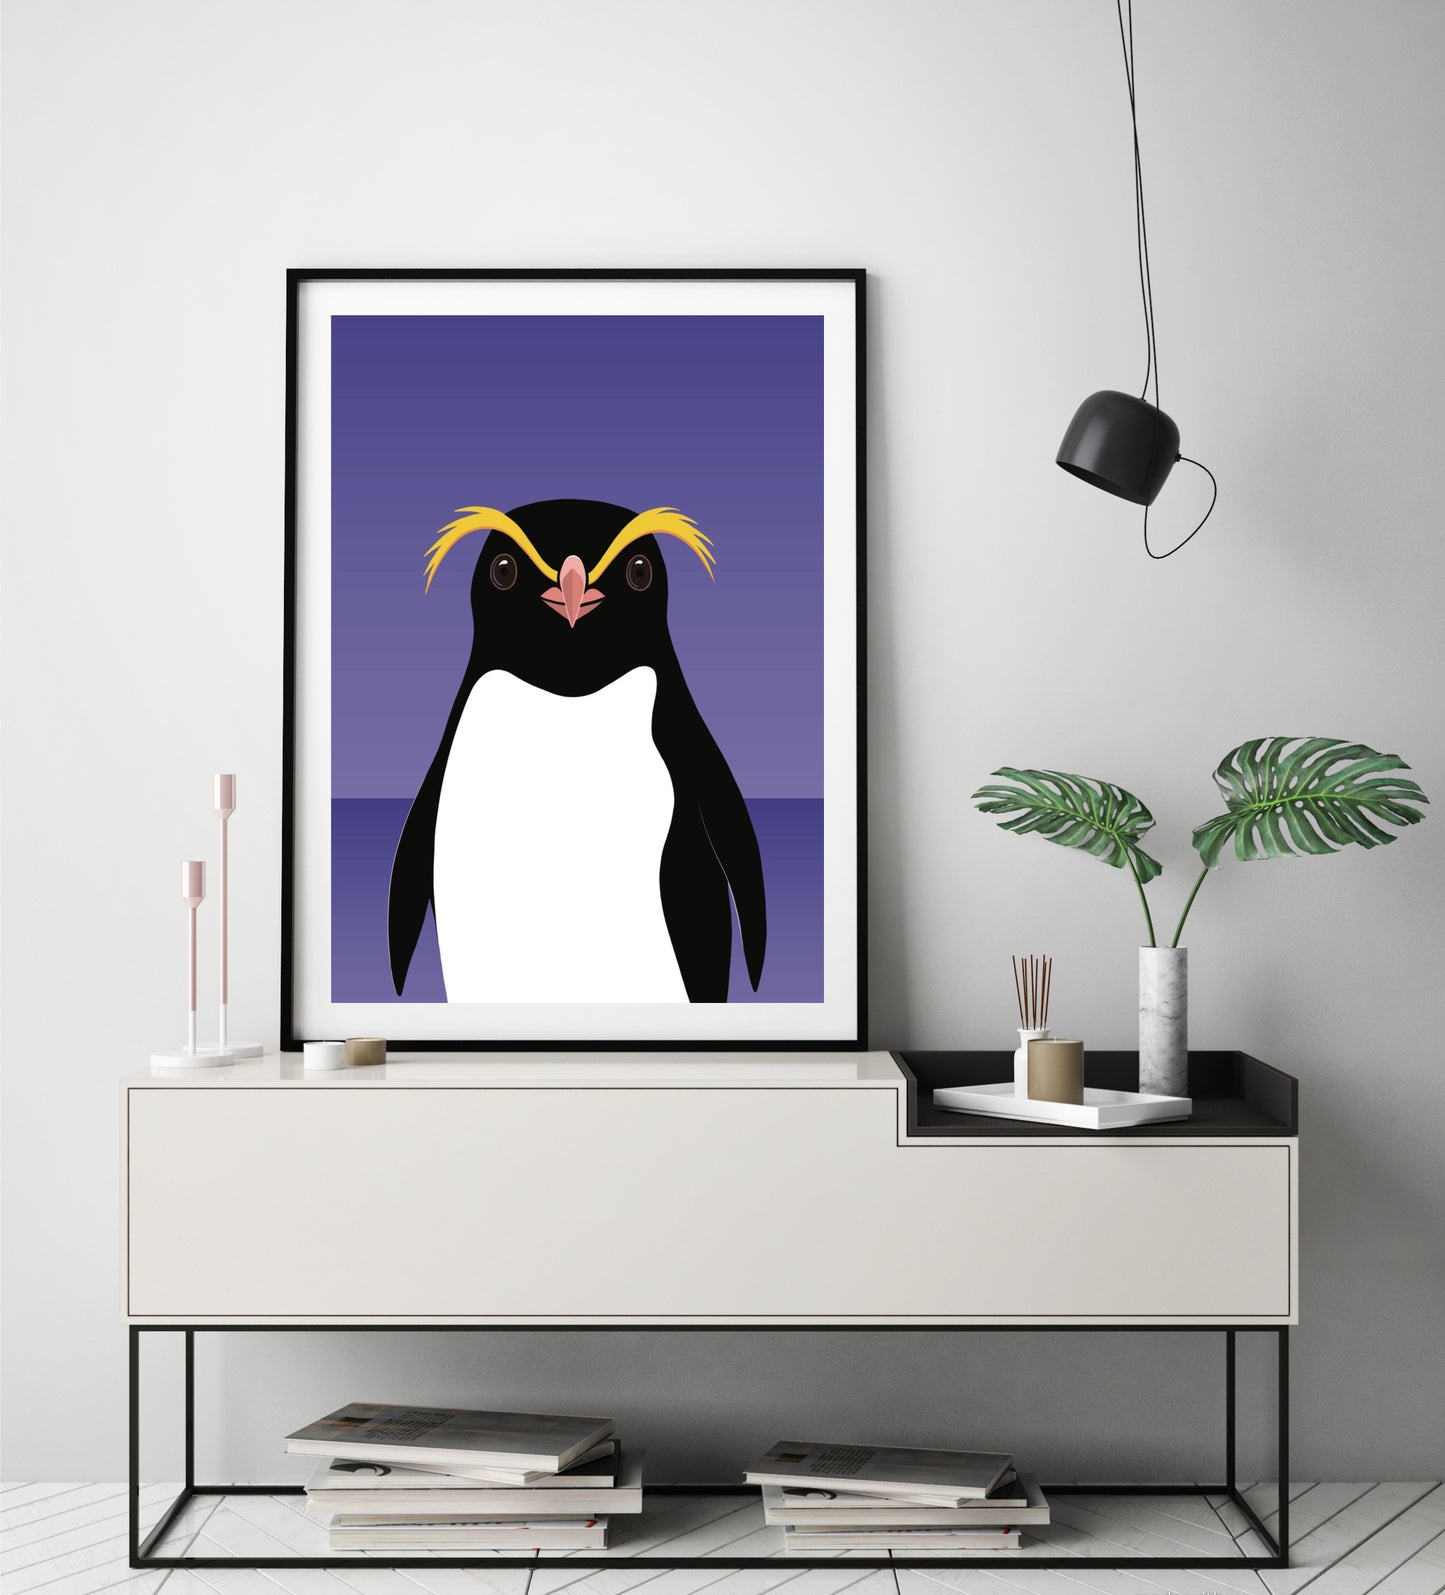 Framed Art print of the Crested Penguin of New Zealand, by Hansby Design